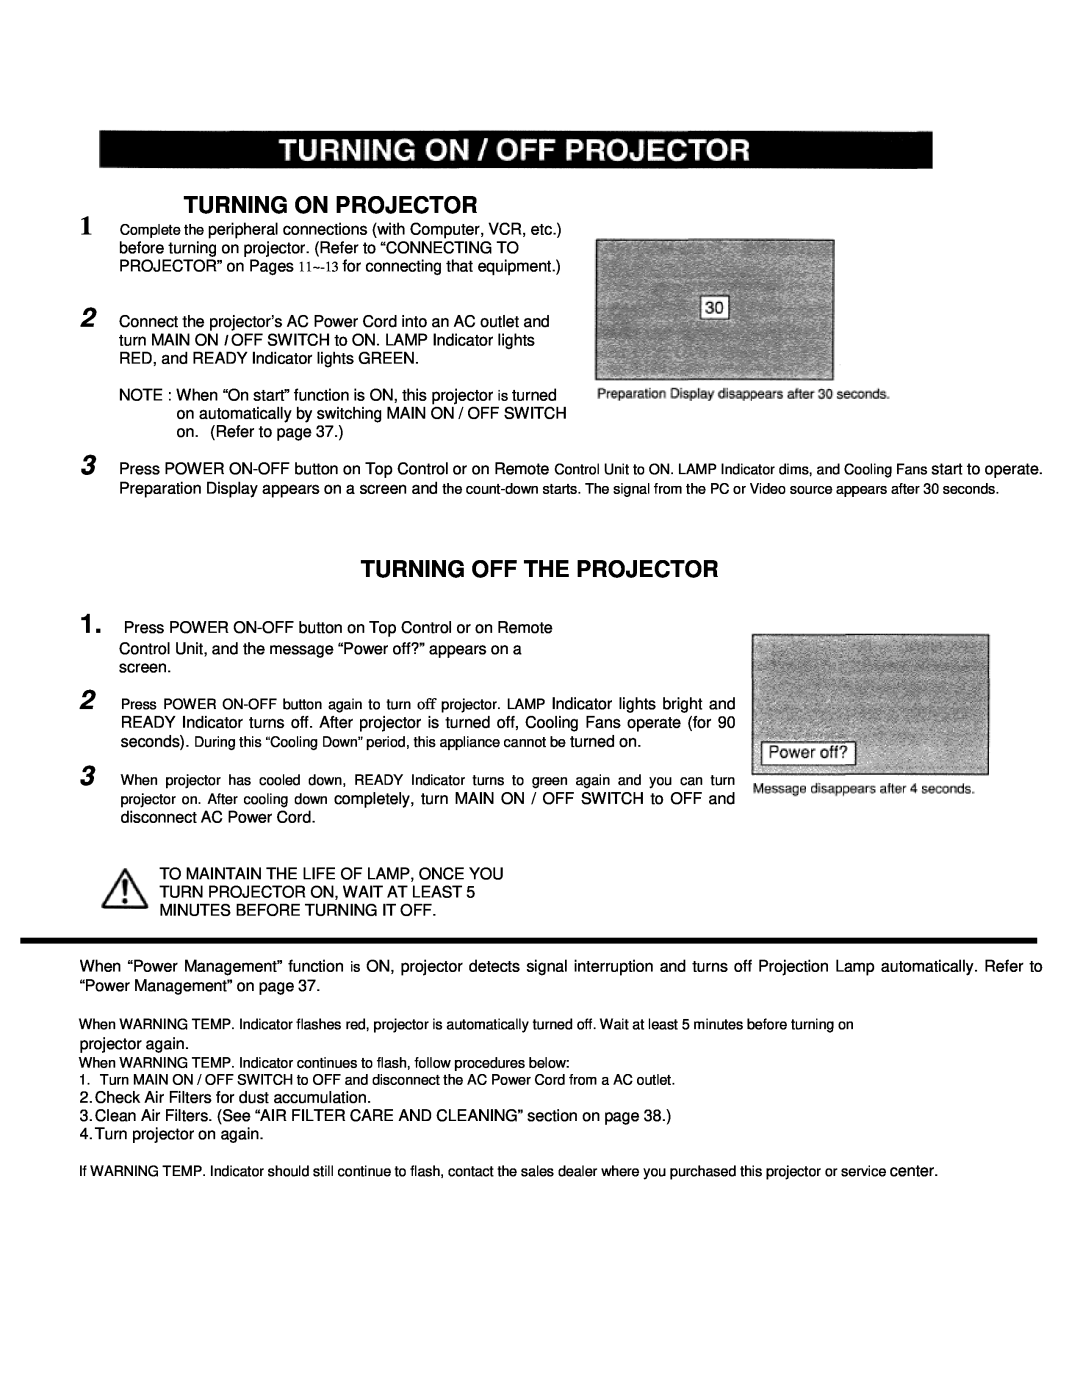 Eiki LC-VC1 owner manual Turning On Projector, Turning Off The Projector 